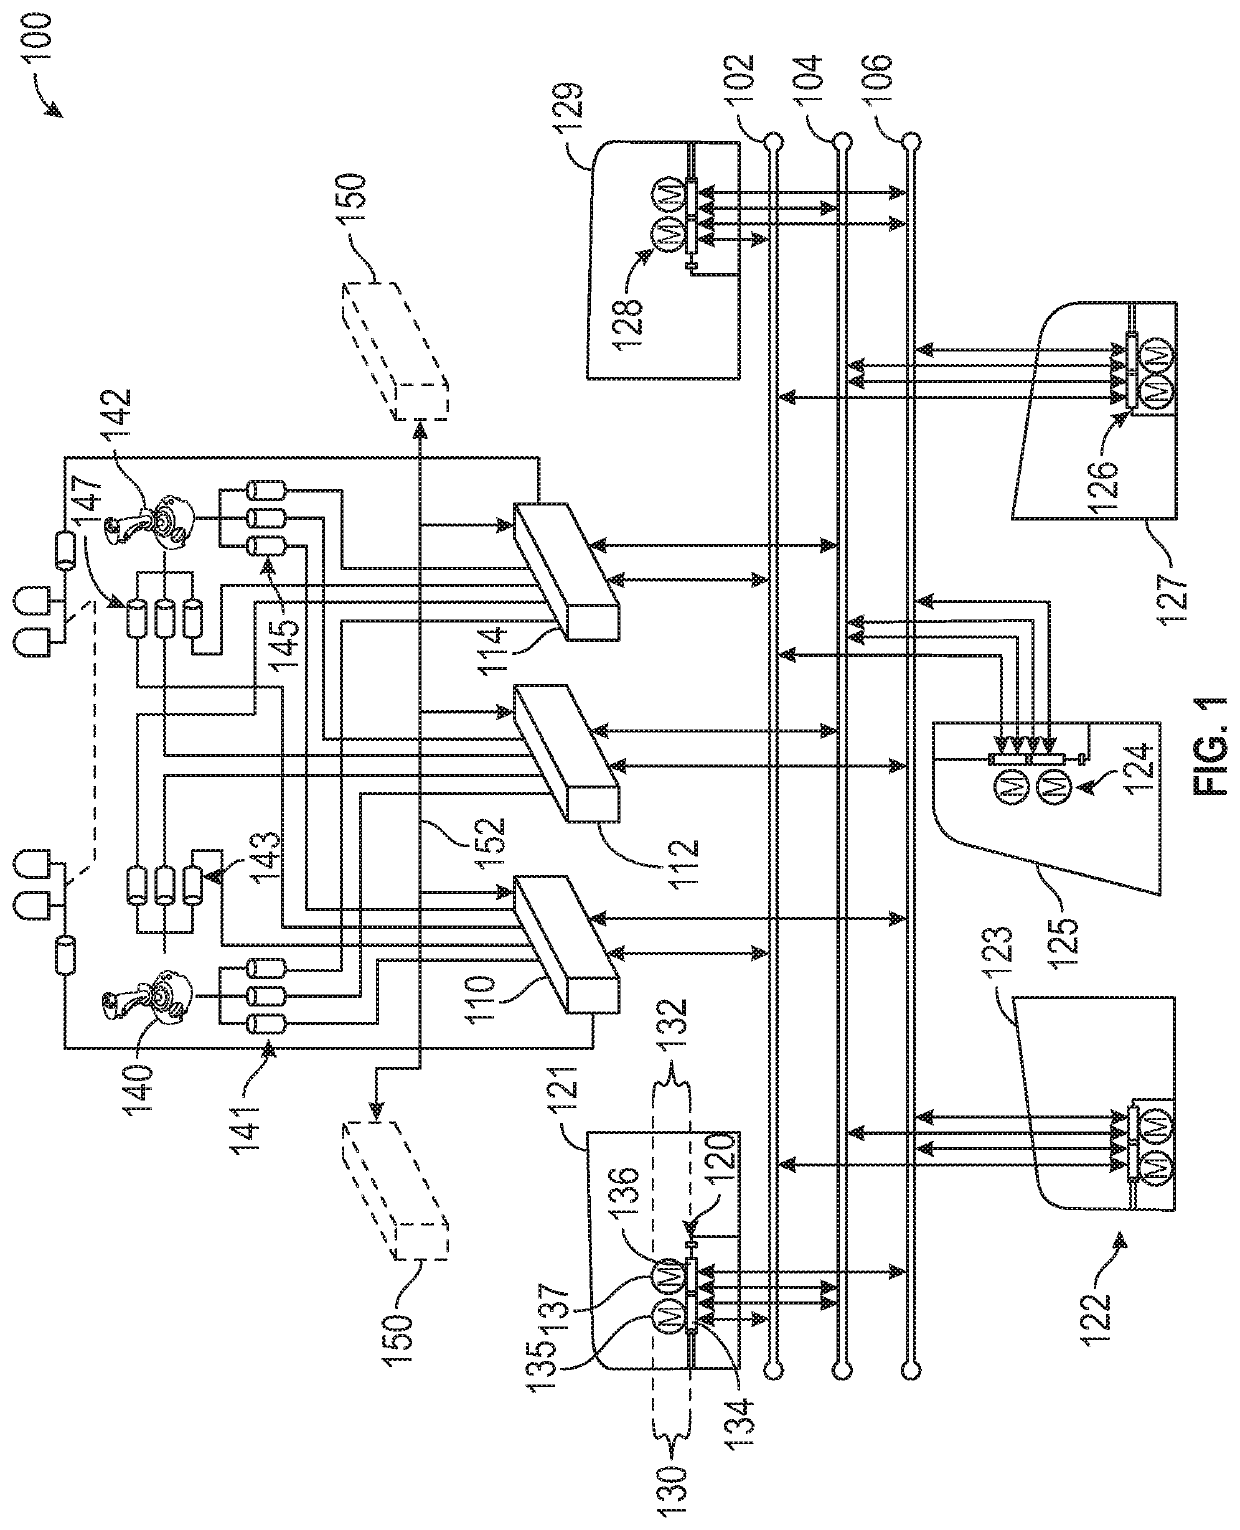 Fly-by-wire systems and related operating methods